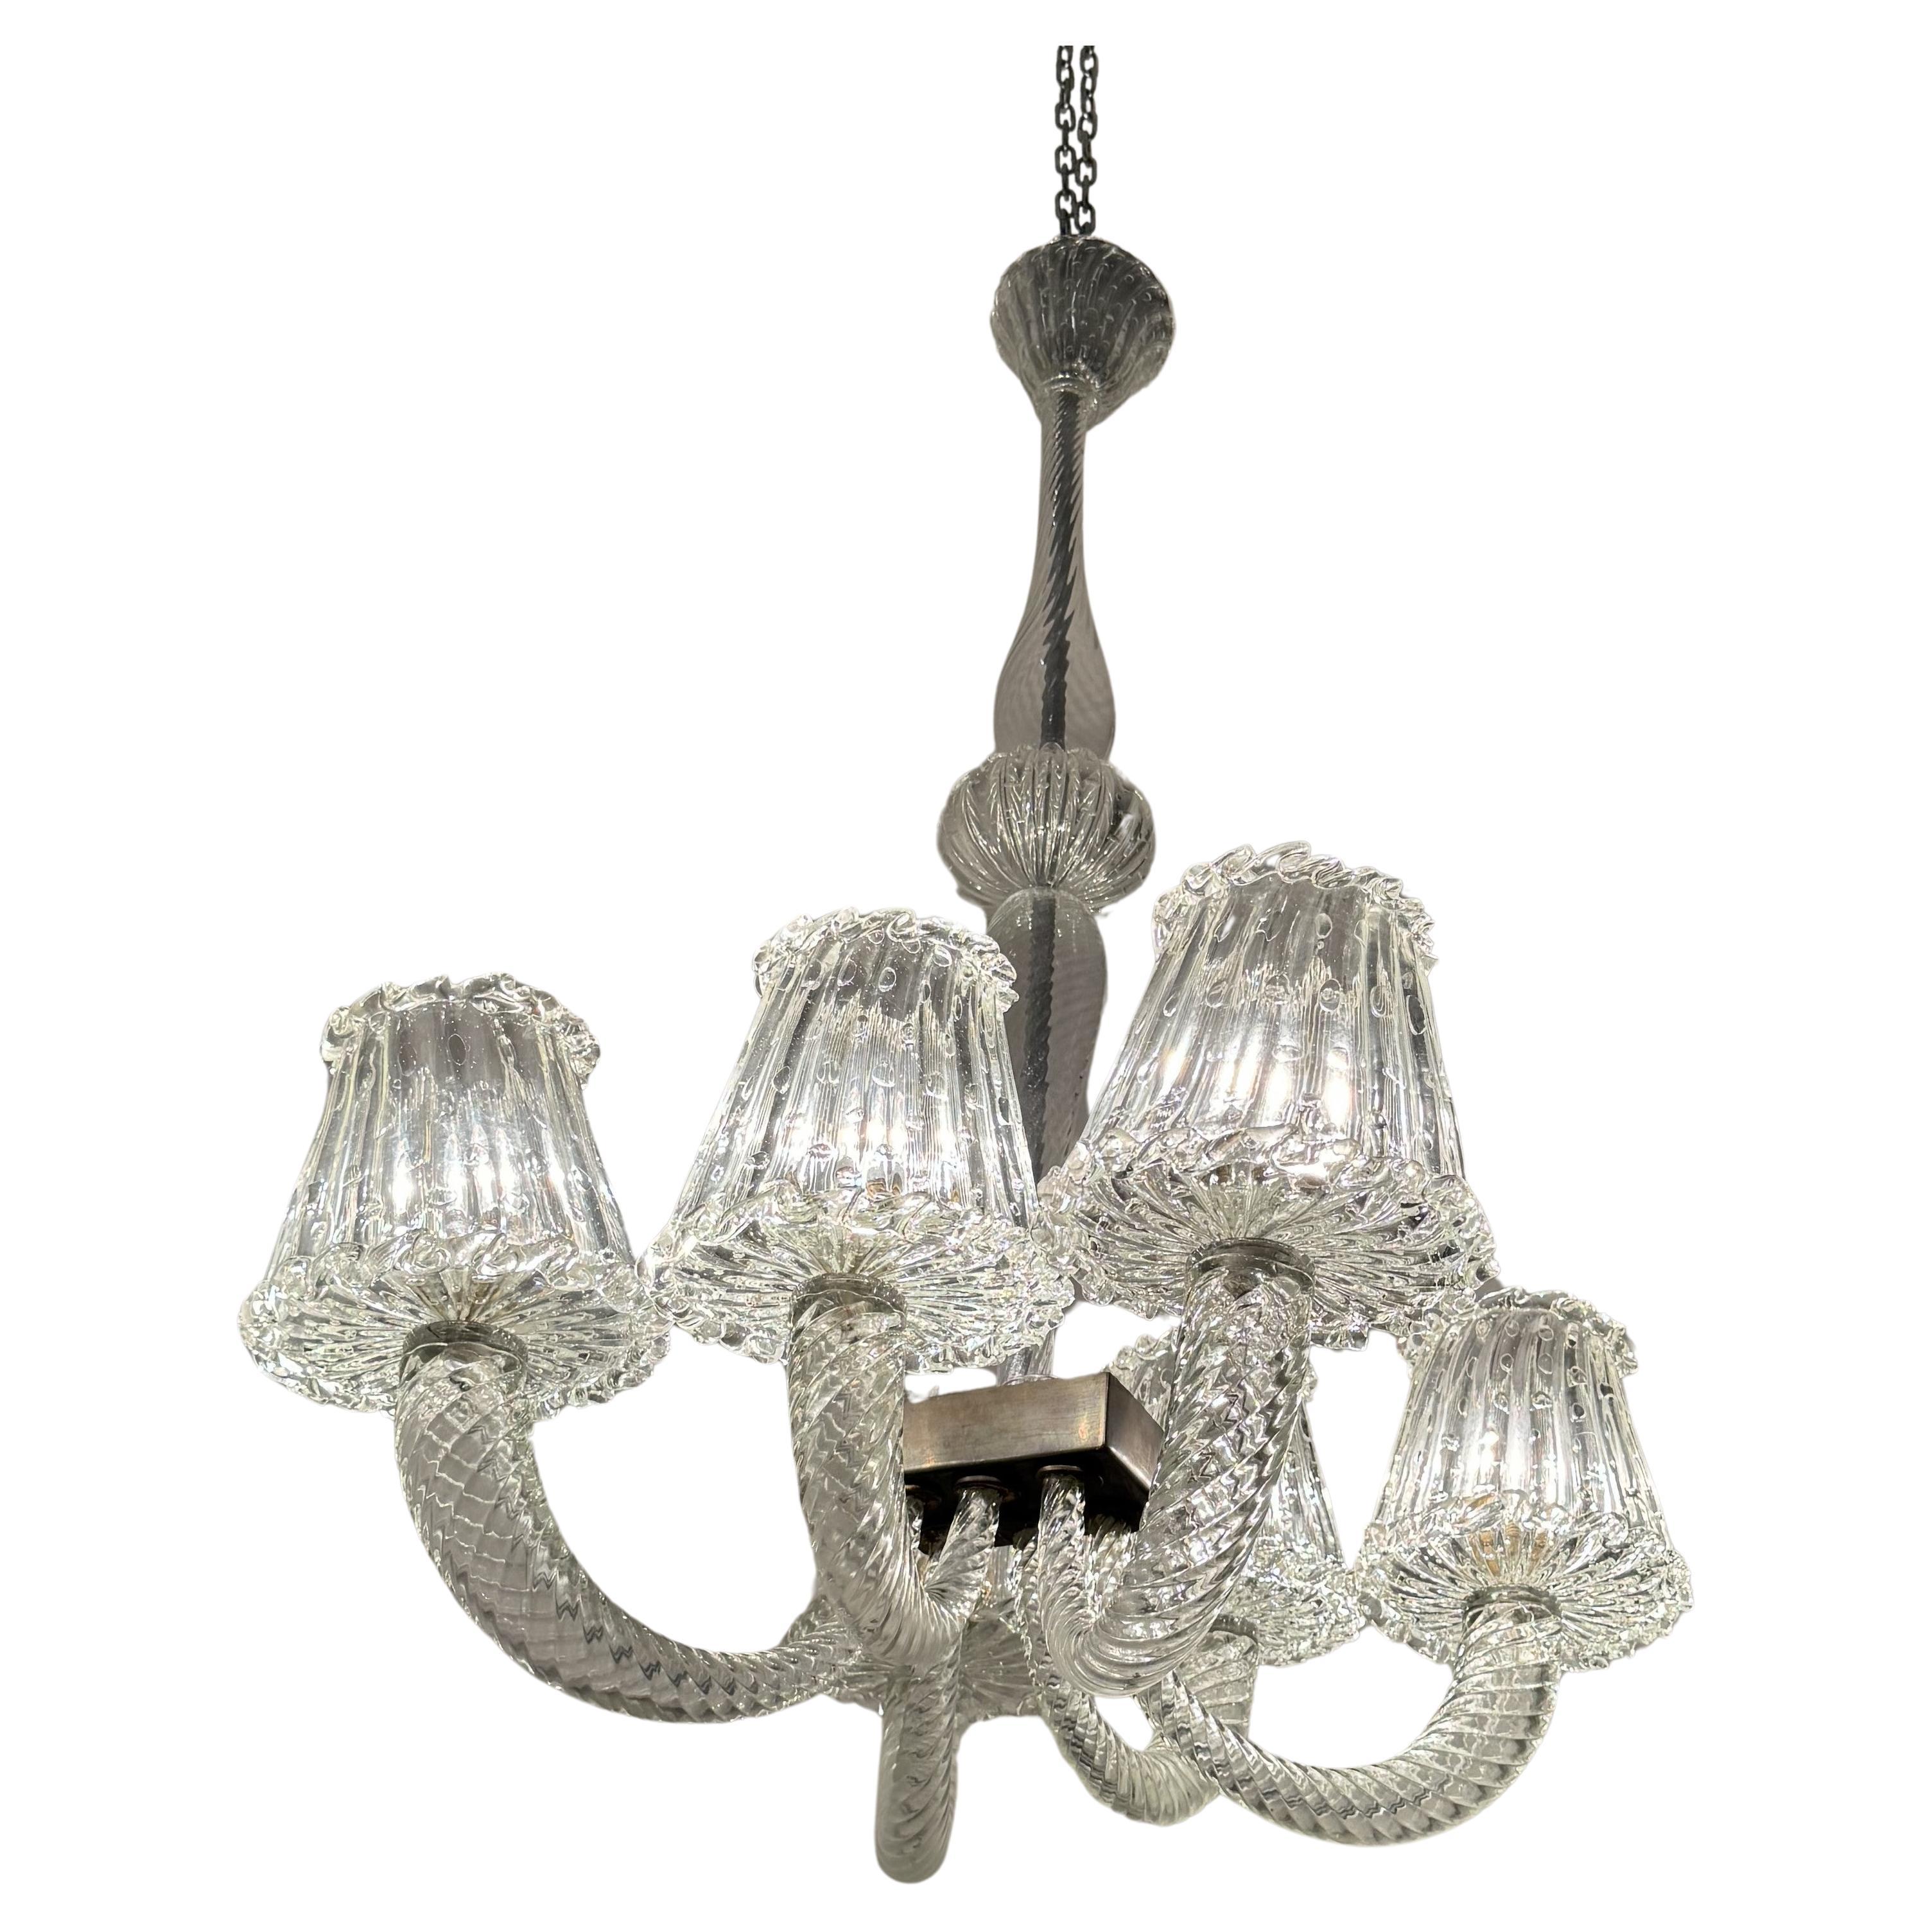 Art Deco Six Light Chandelier Attr. Barovier & Toso, Murano, Italy ca. 1930 For Sale